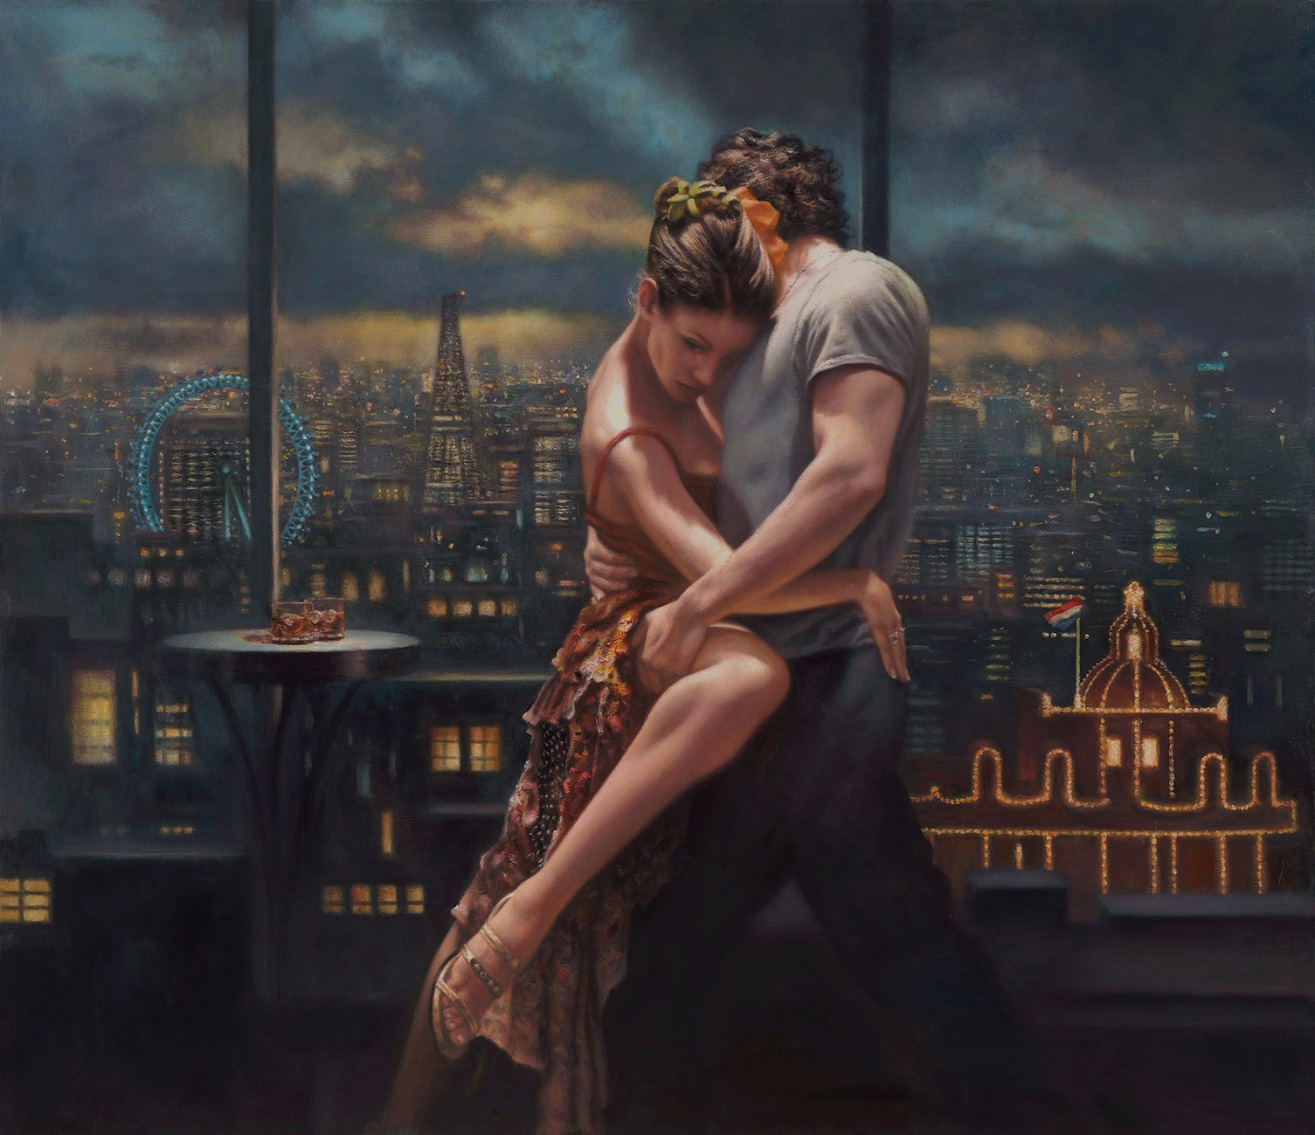 The World Stands Still by Hamish Blakely